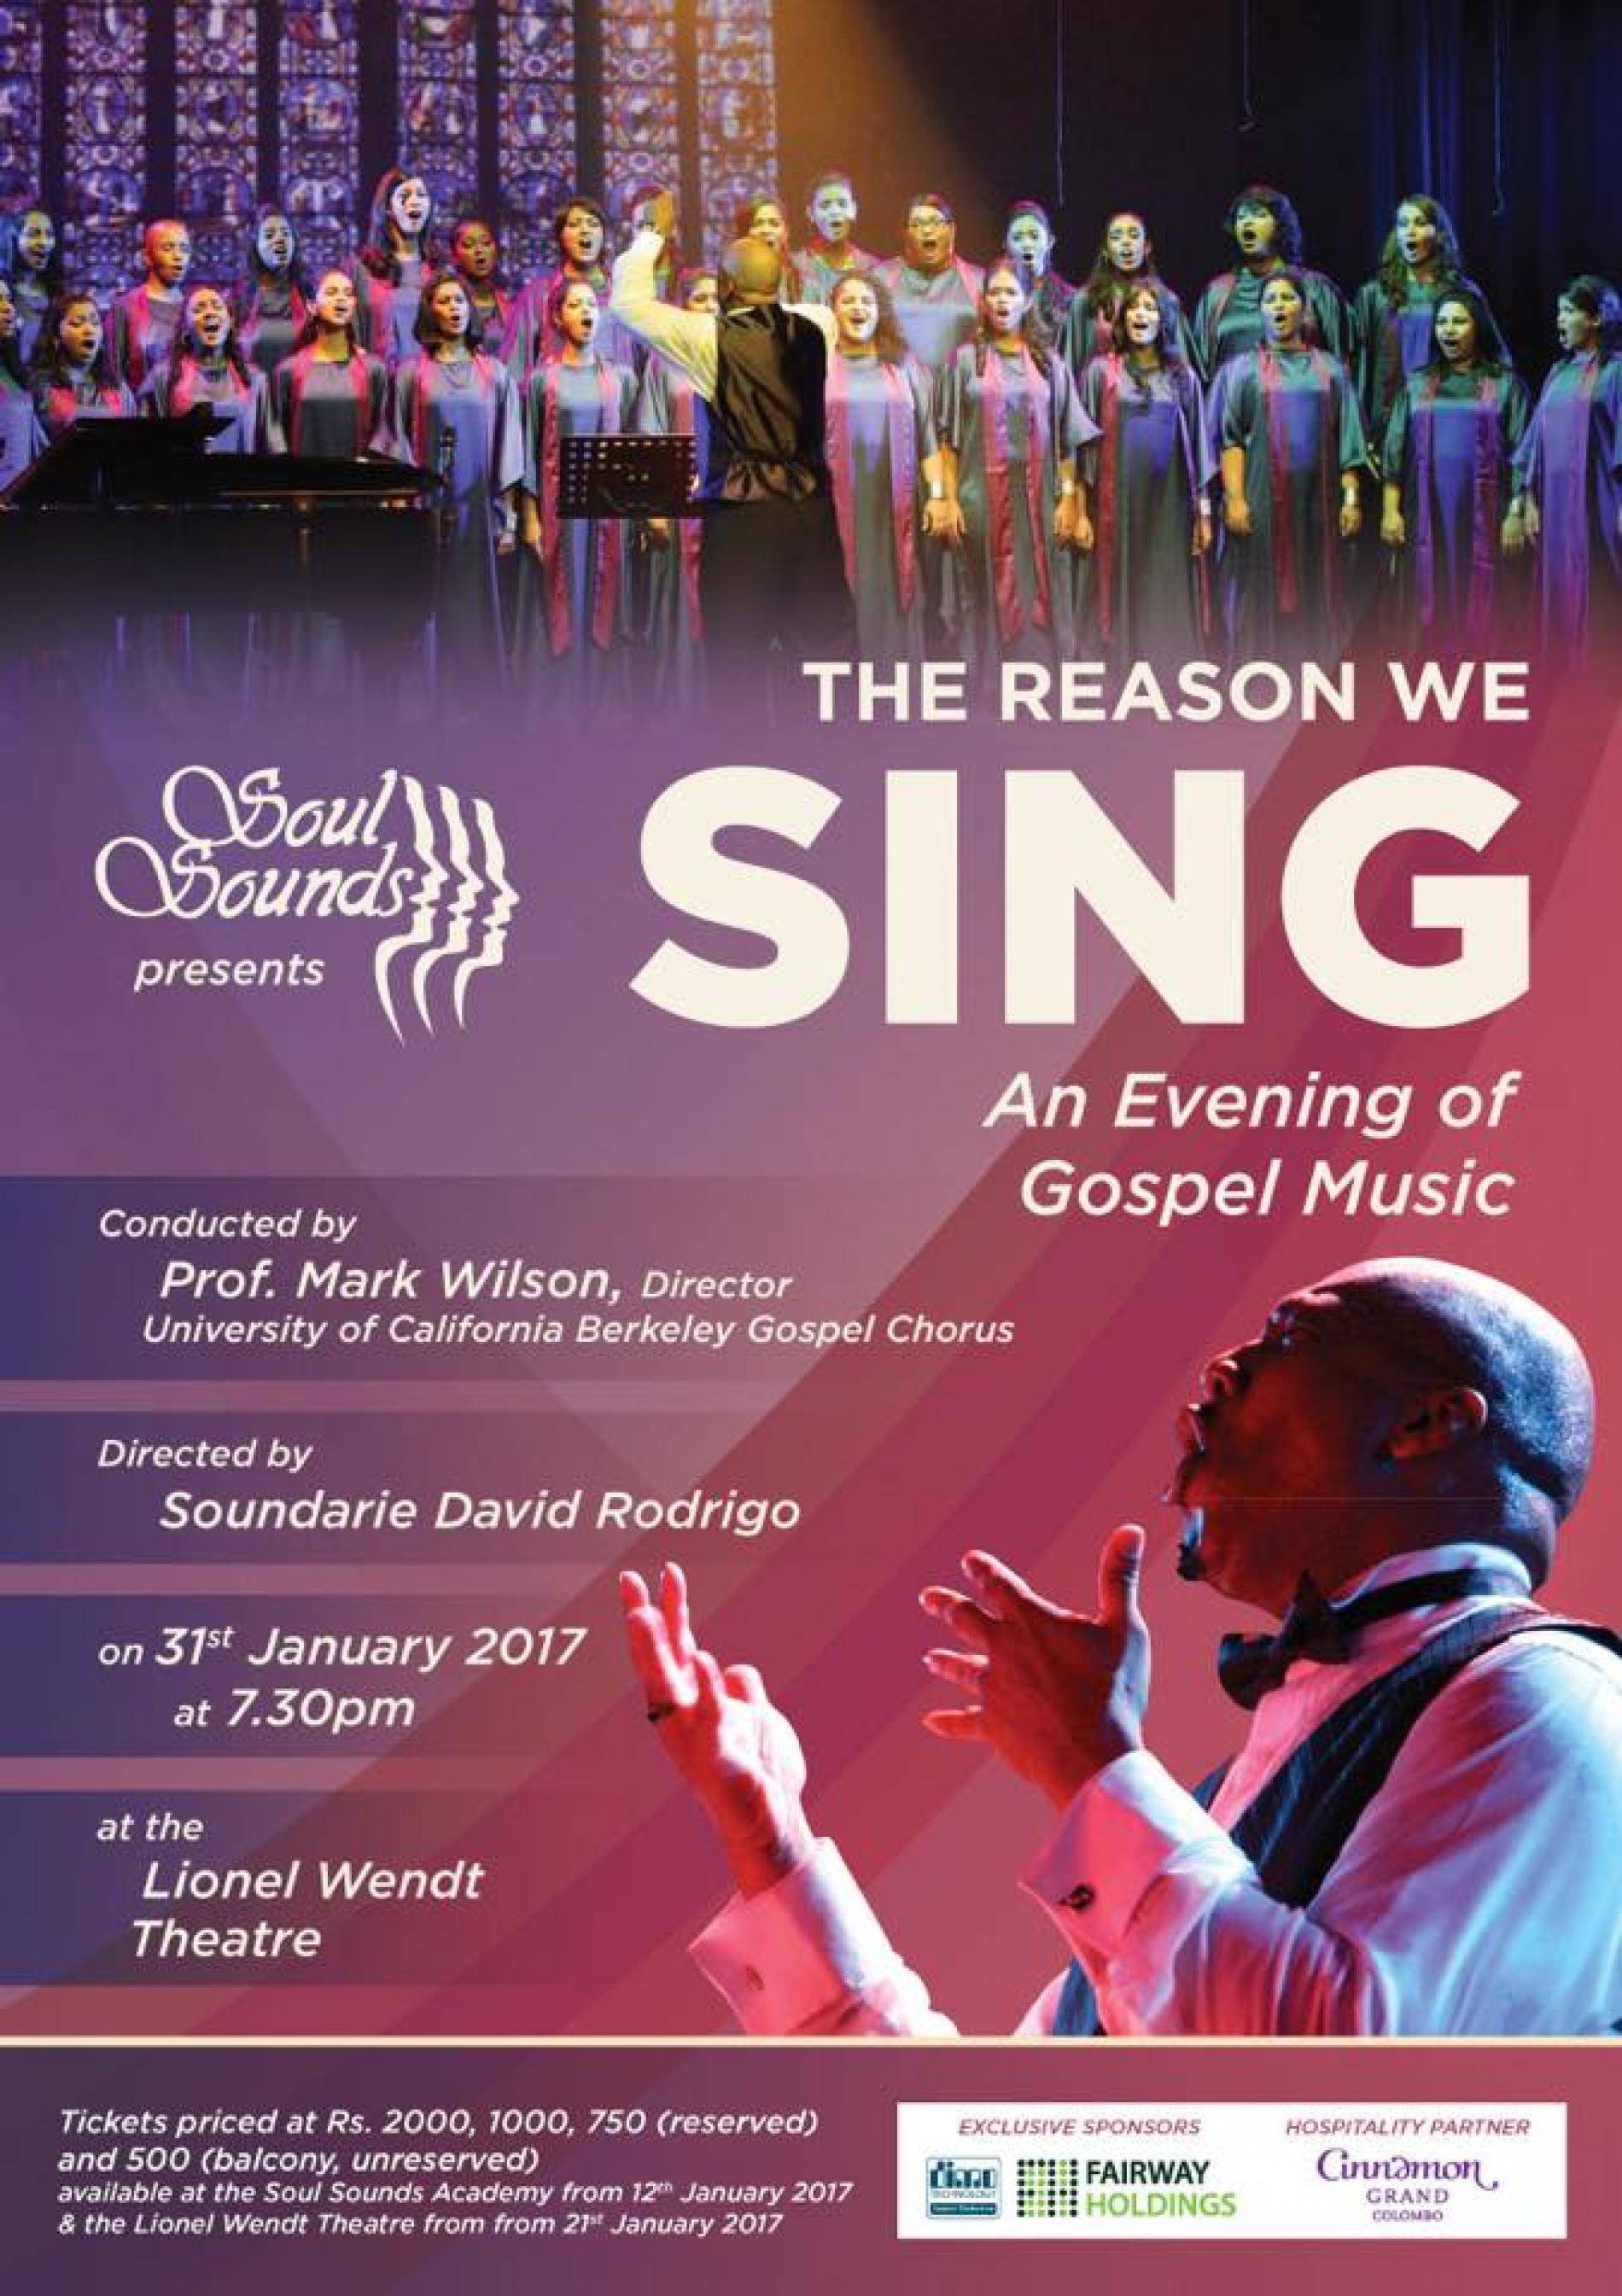 The Reason We Sing – An Evening of Gospel Music